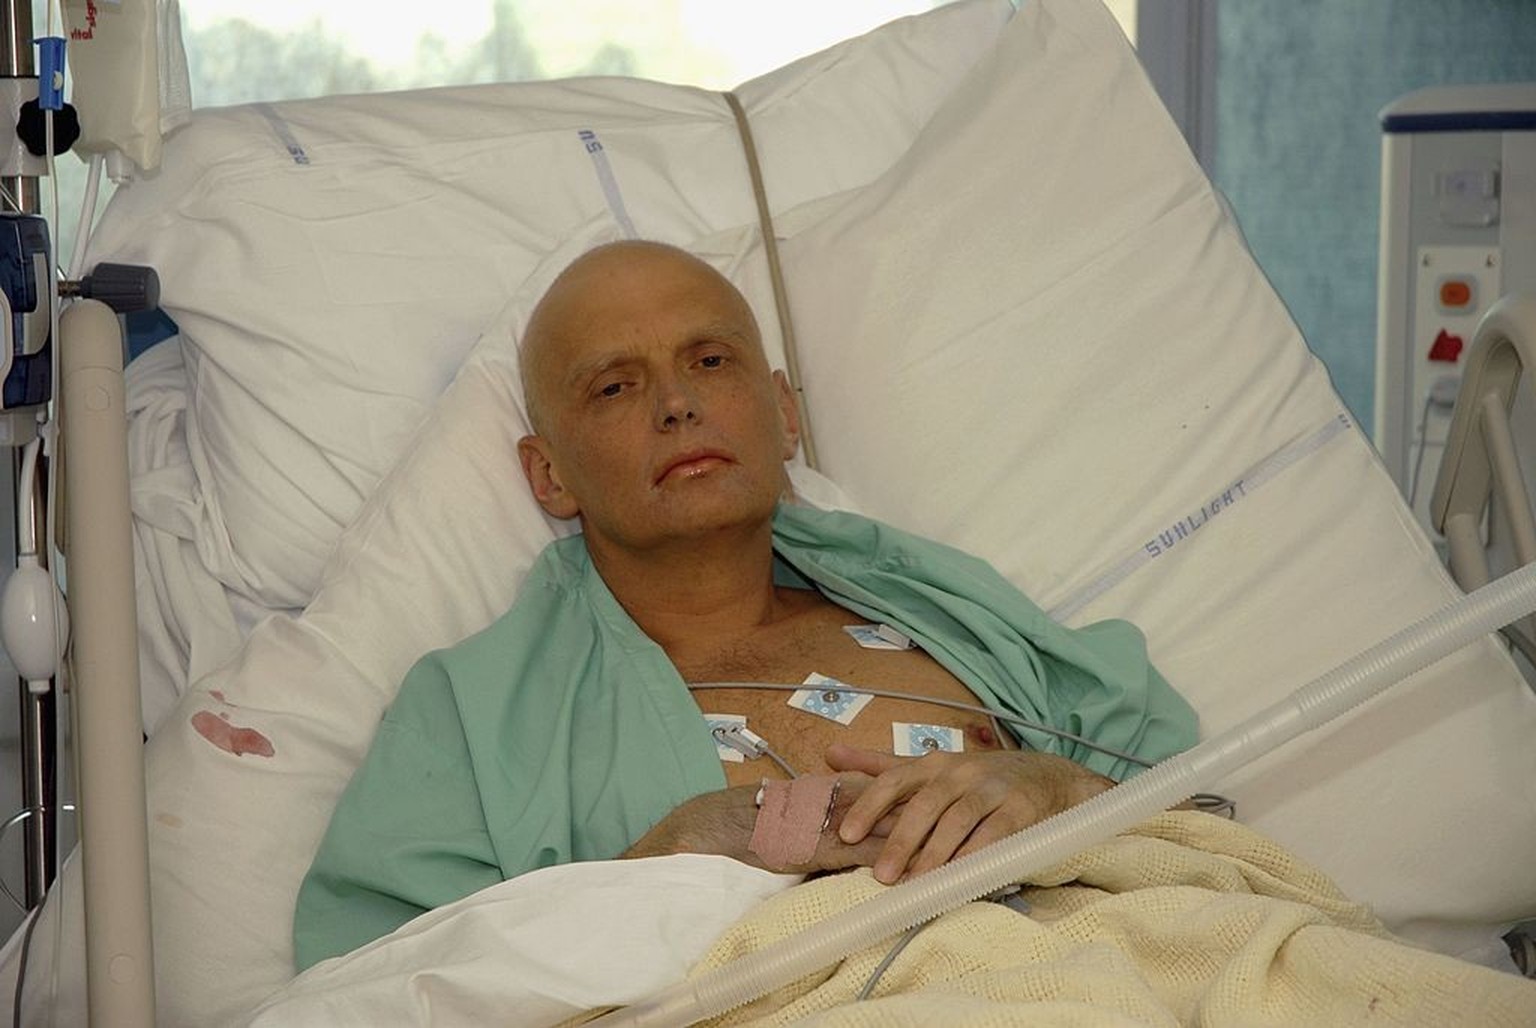 LONDON - NOVEMBER 20: In this image made available on November 25, 2006, Alexander Litvinenko is pictured at the Intensive Care Unit of University College Hospital on November 20, 2006 in London, Engl ...